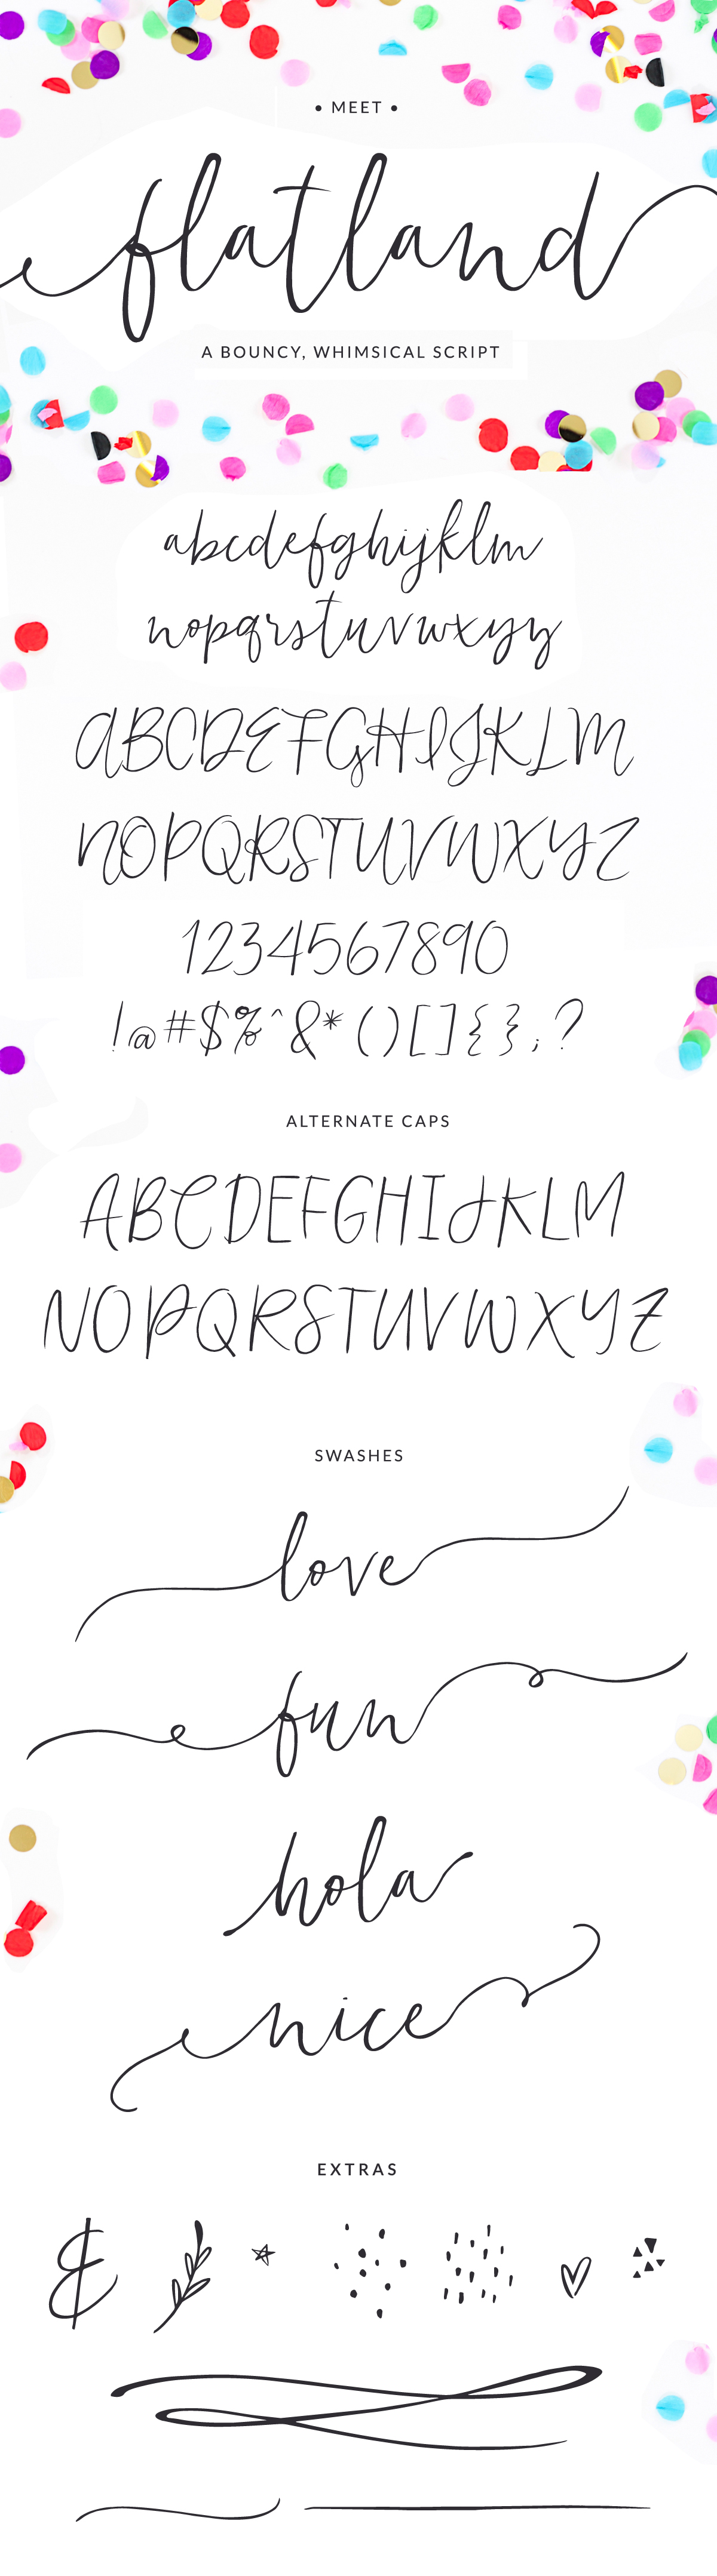 Flatland Modern Calligraphy Font by Angie Makes